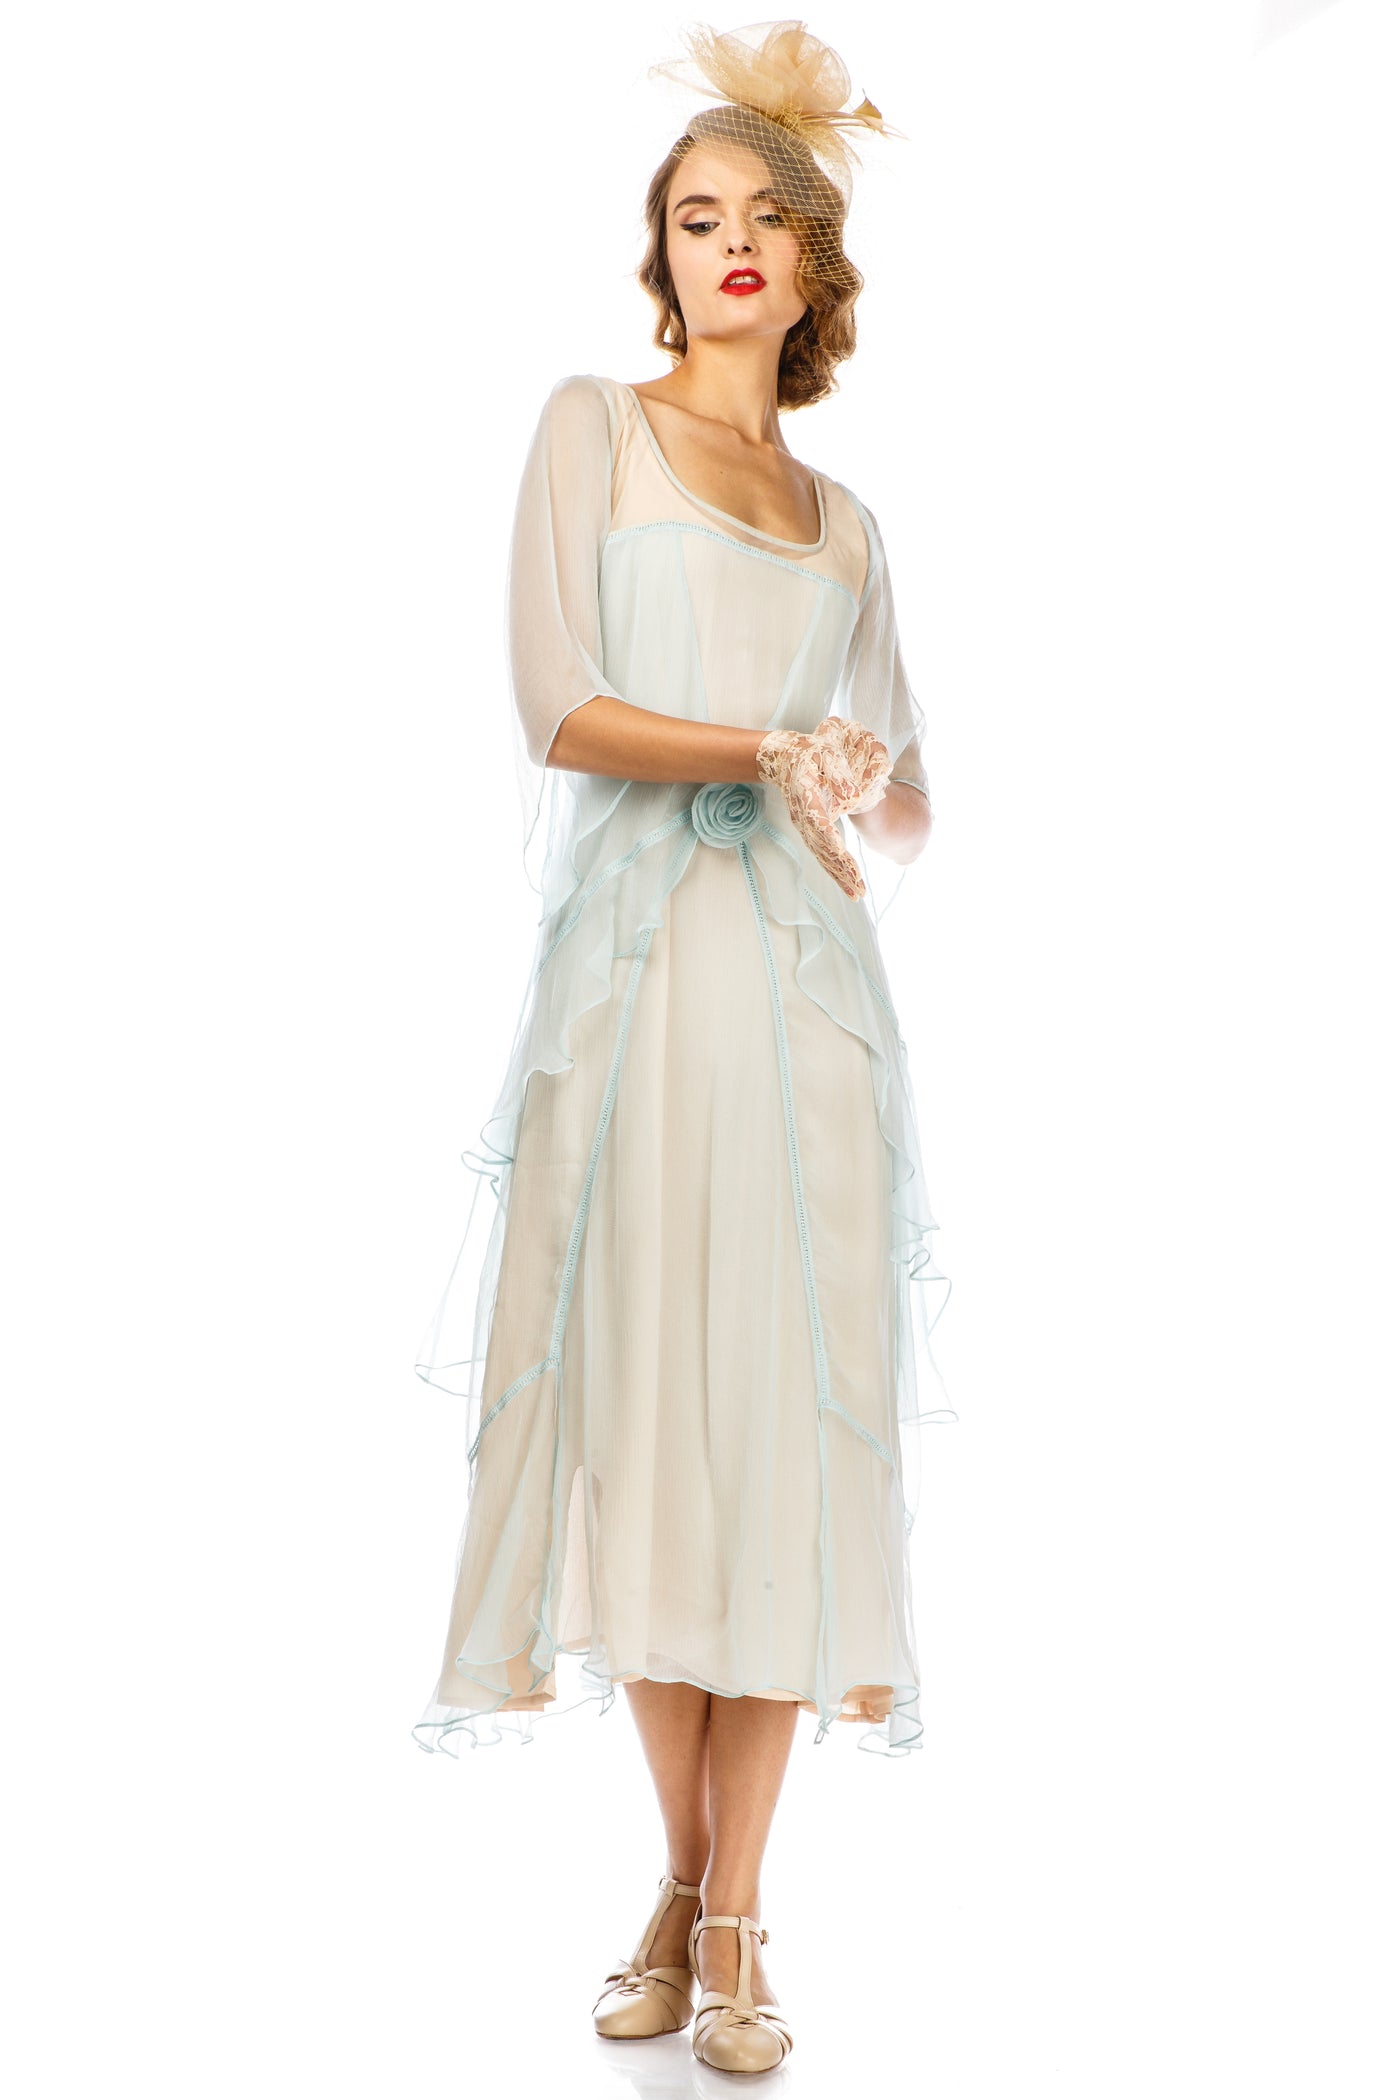 10709 Great Gatsby Party Dress in Nude Mint by Nataya